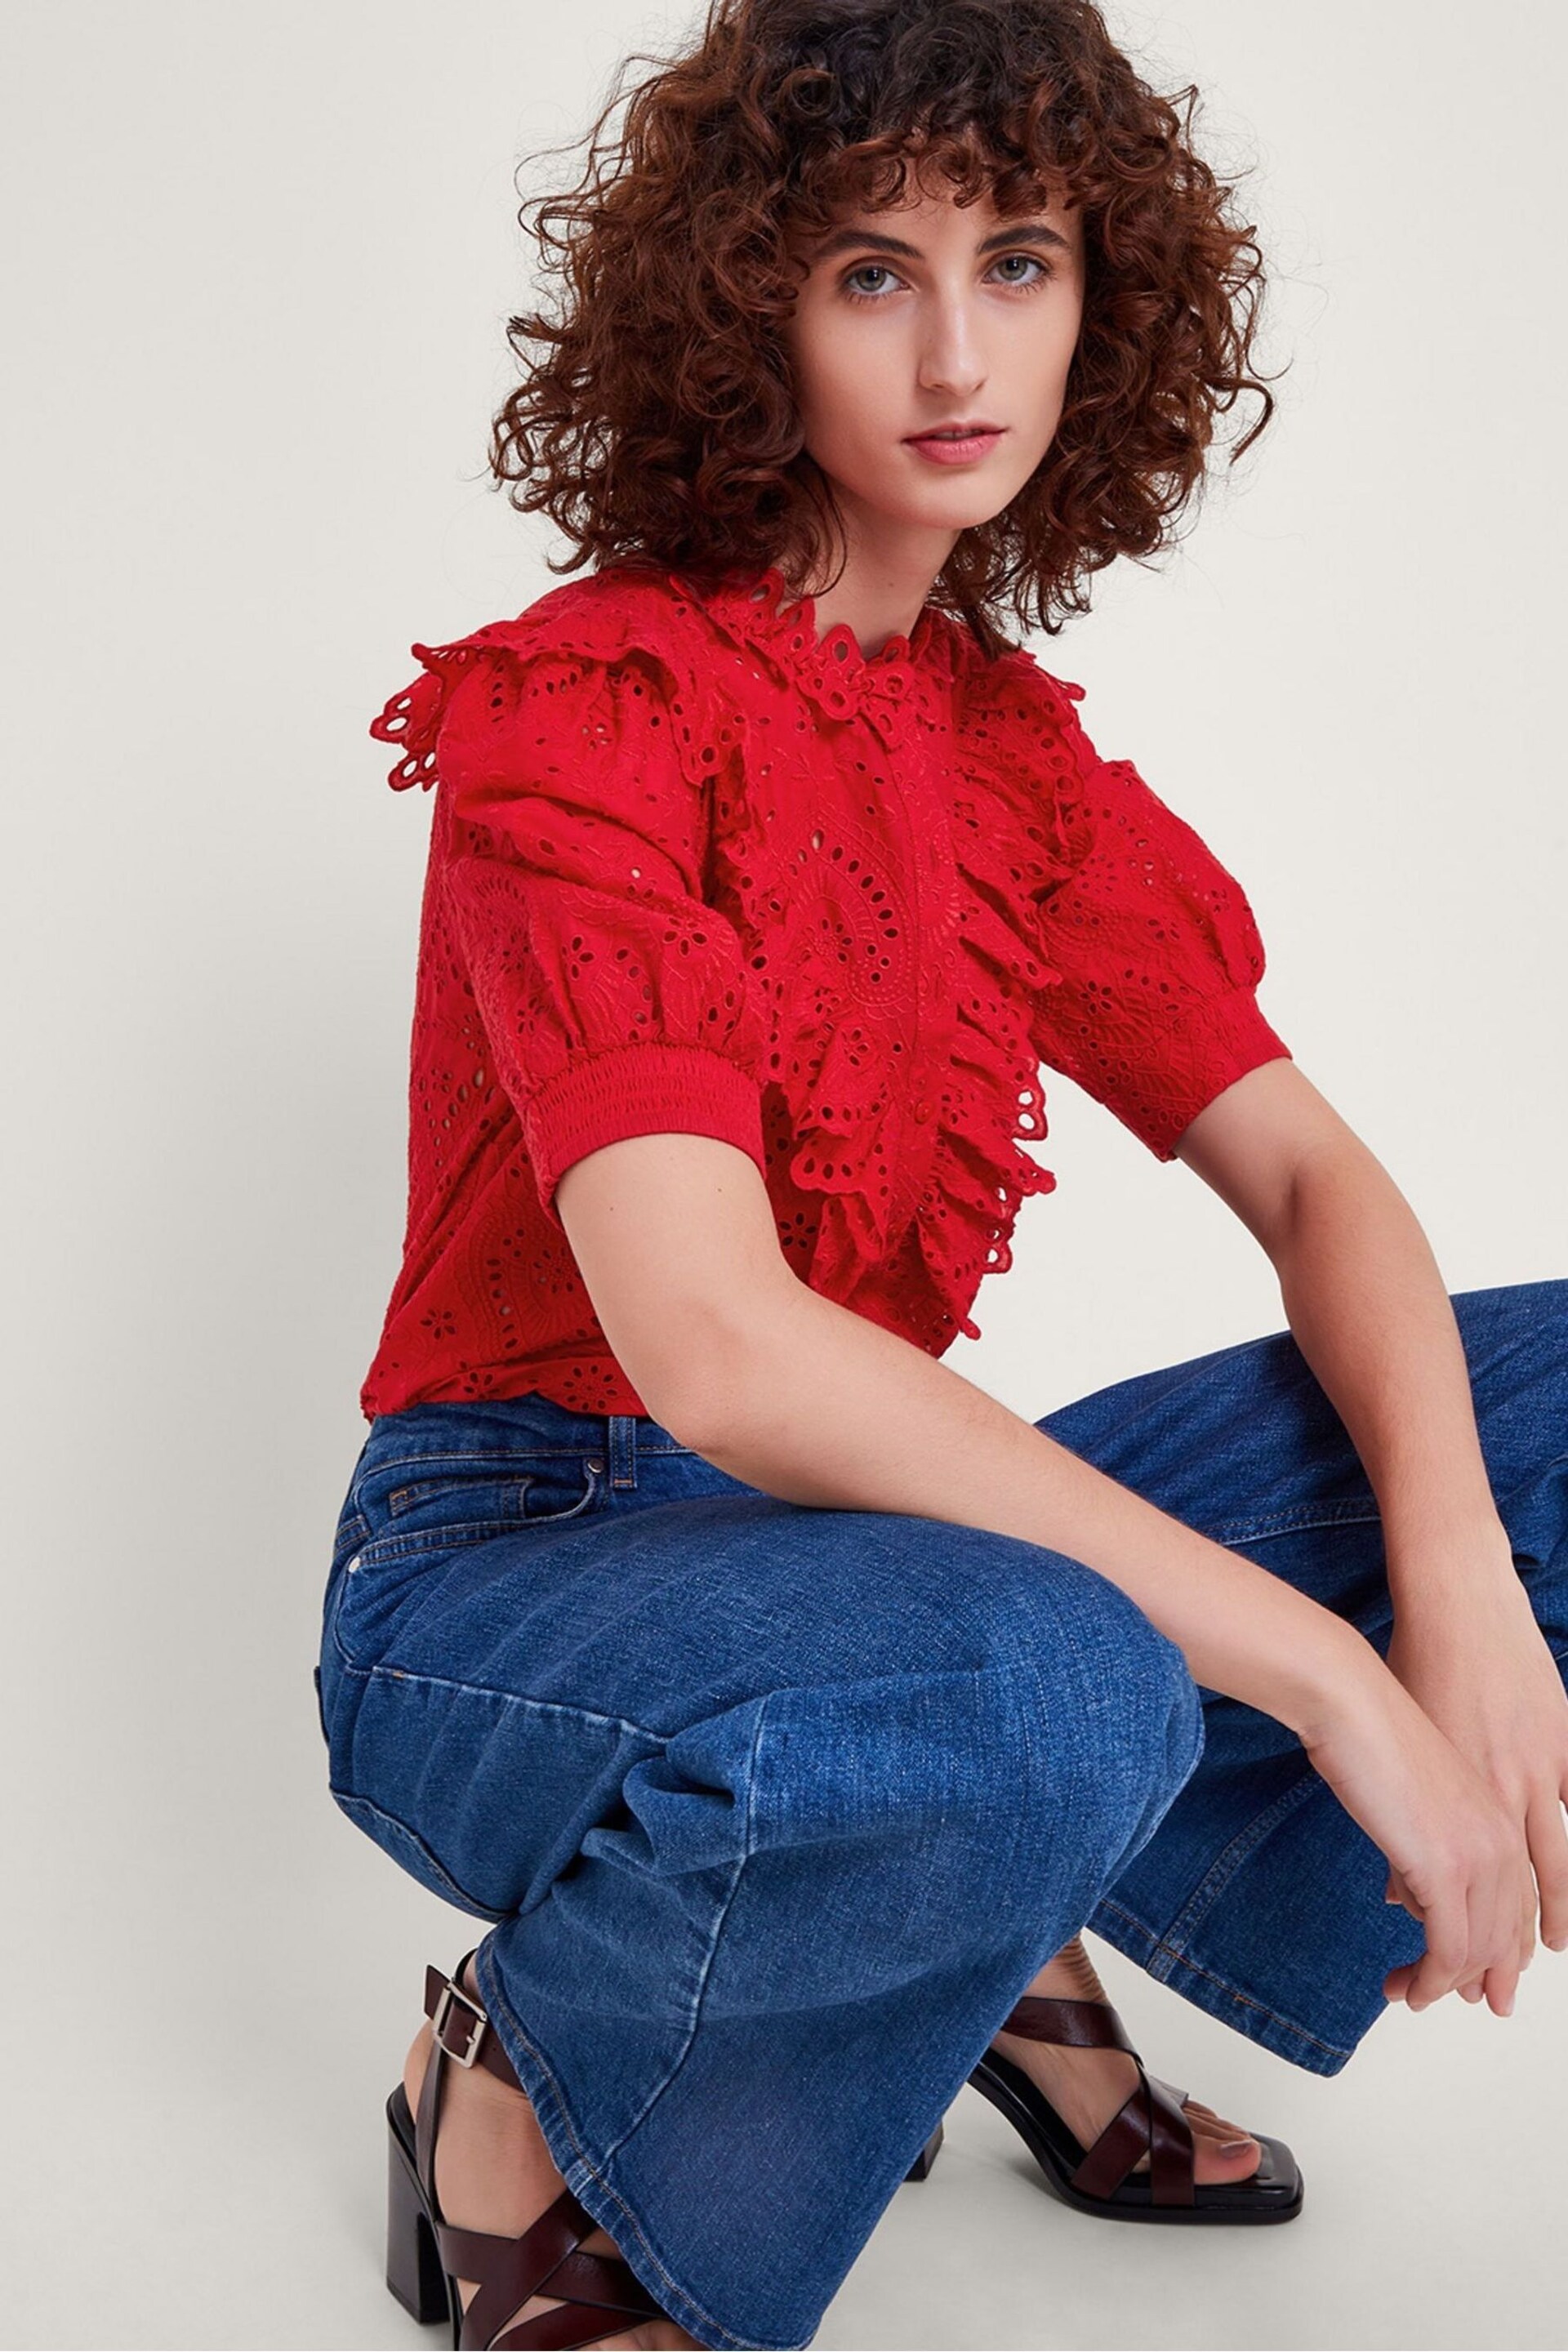 Monsoon Red Mari Broderie Blouse - Image 1 of 5